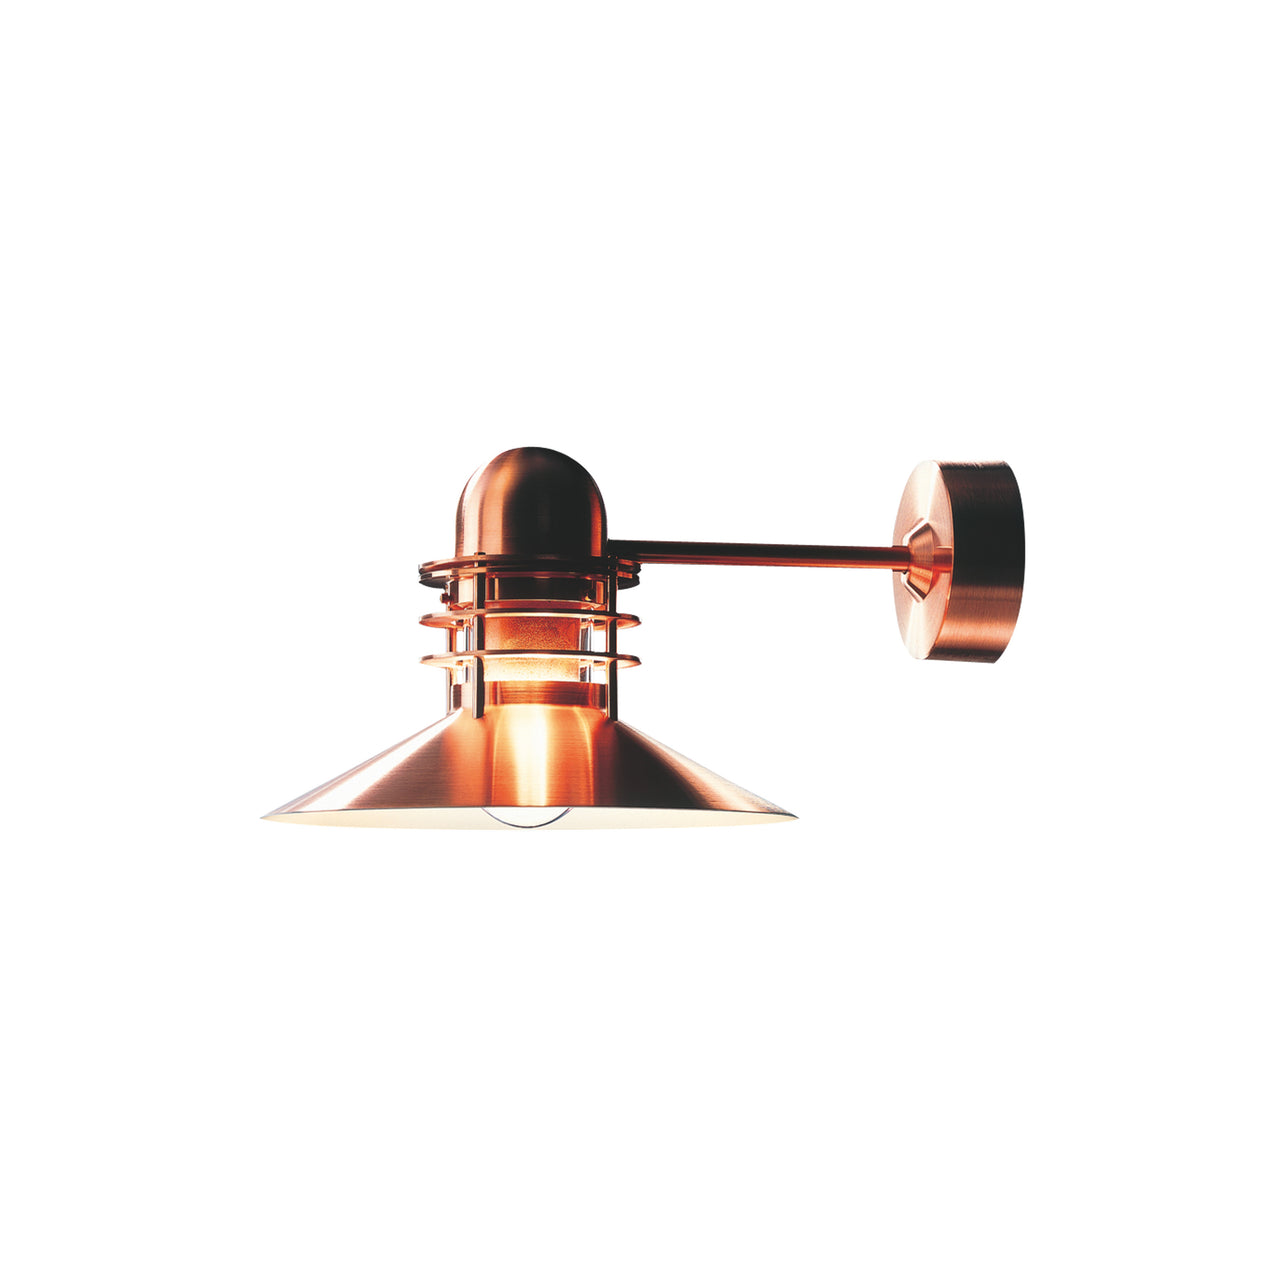 Nyhavn Wall Lamp: Outdoor + Brushed Copper